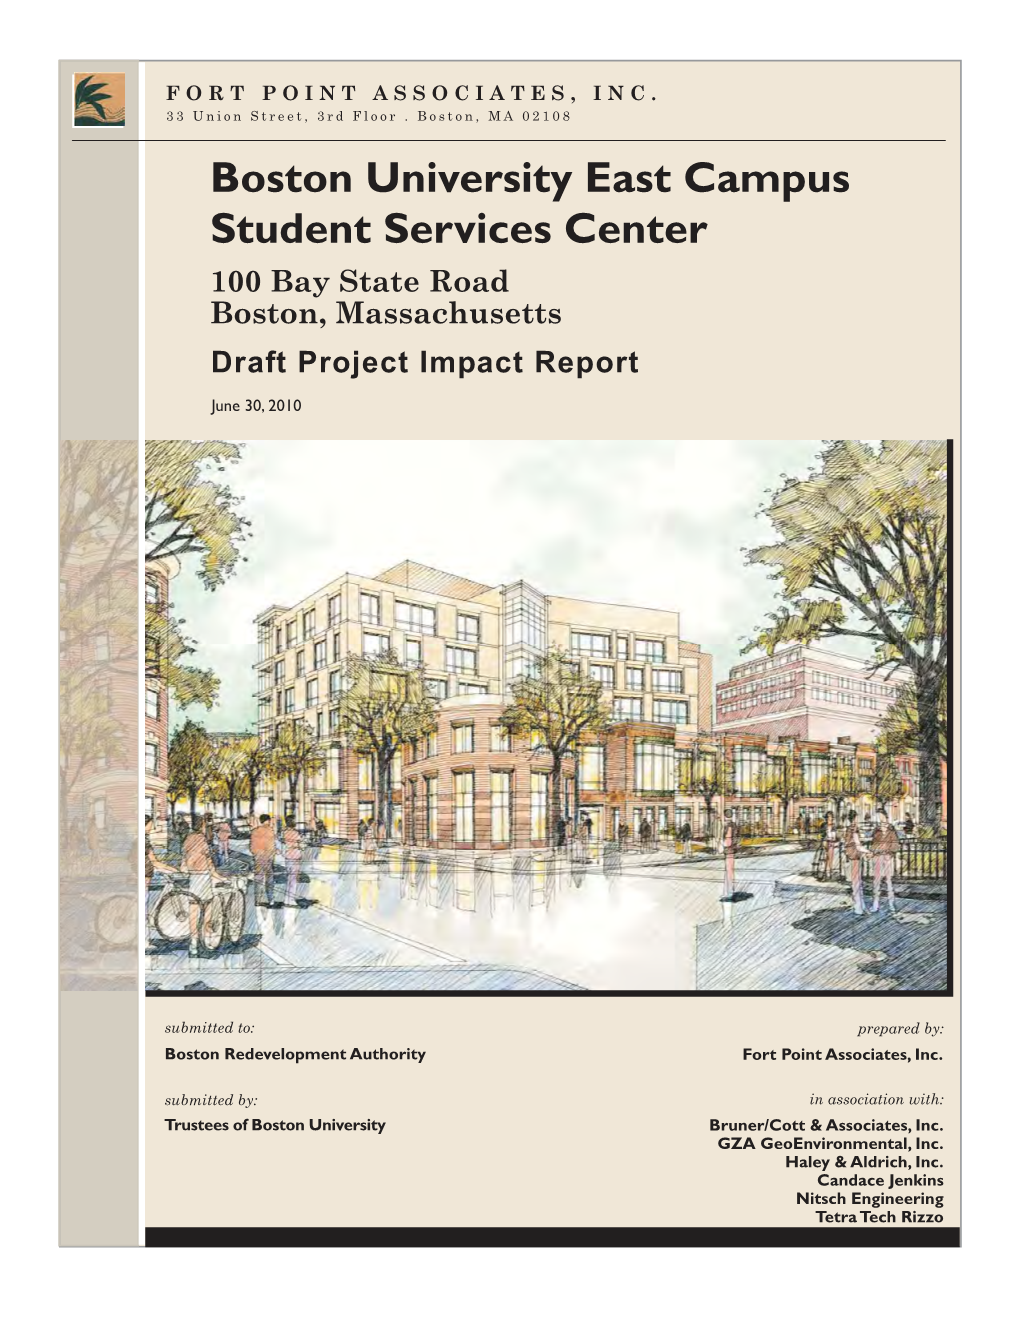 Boston University East Campus Student Services Center 100 Bay State Road Boston, Massachusetts Draft Project Impact Report